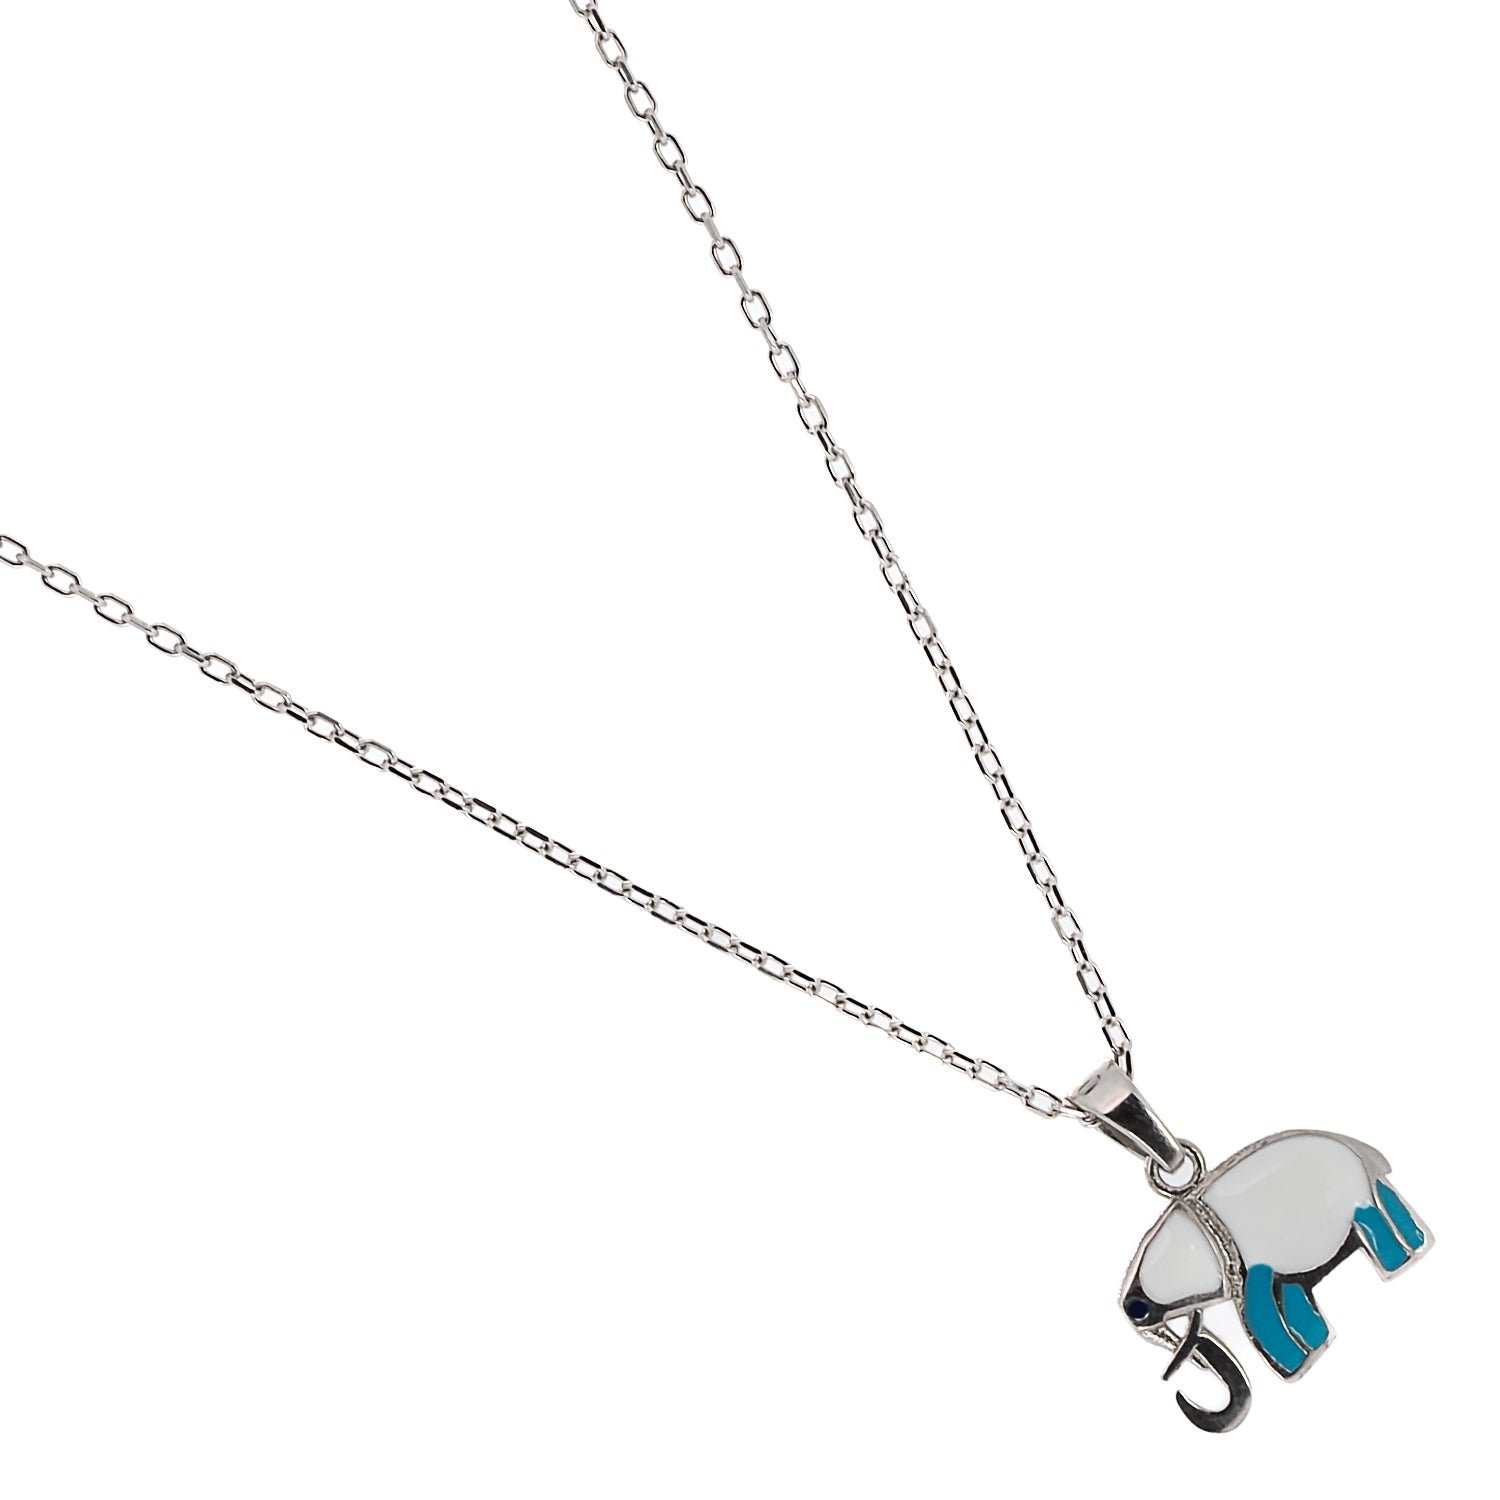 The Sterling Silver Turquoise Elephant Necklace, a meaningful and thoughtful gift for someone special.